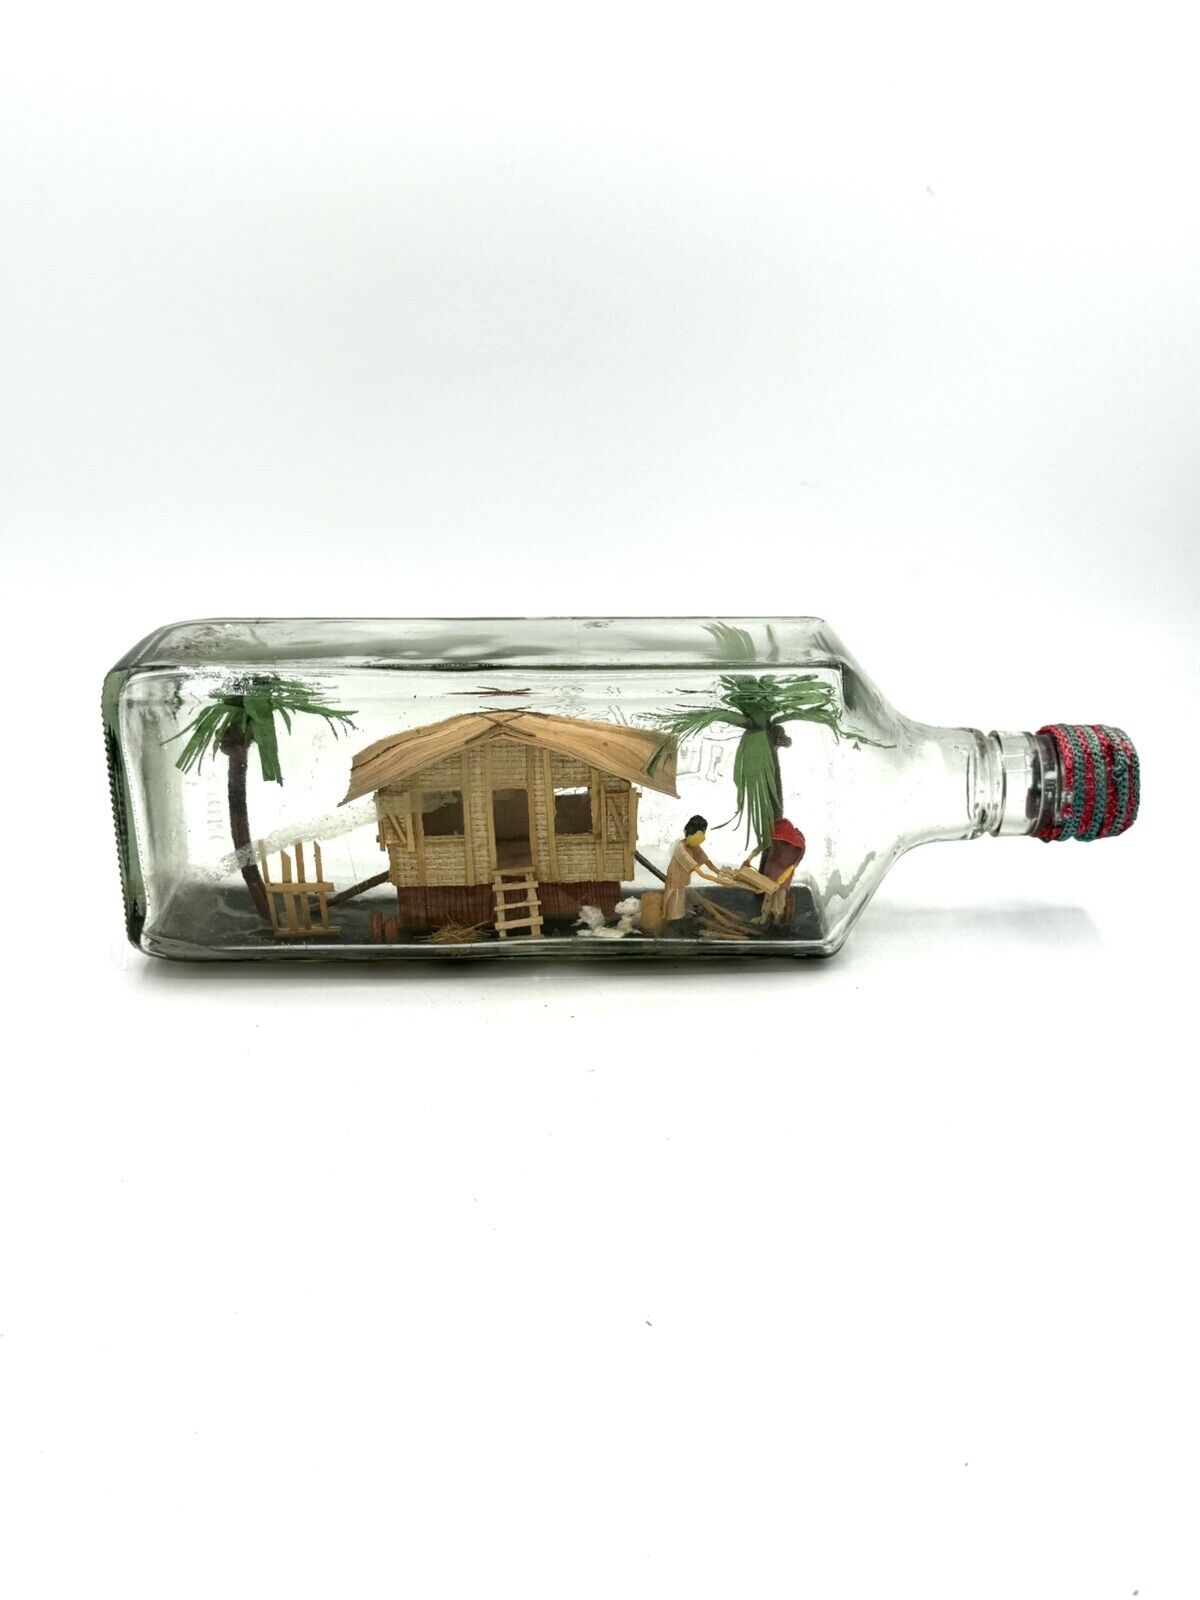 Vintage Philippines Village Diorama in W&A Gilby London England Bottle